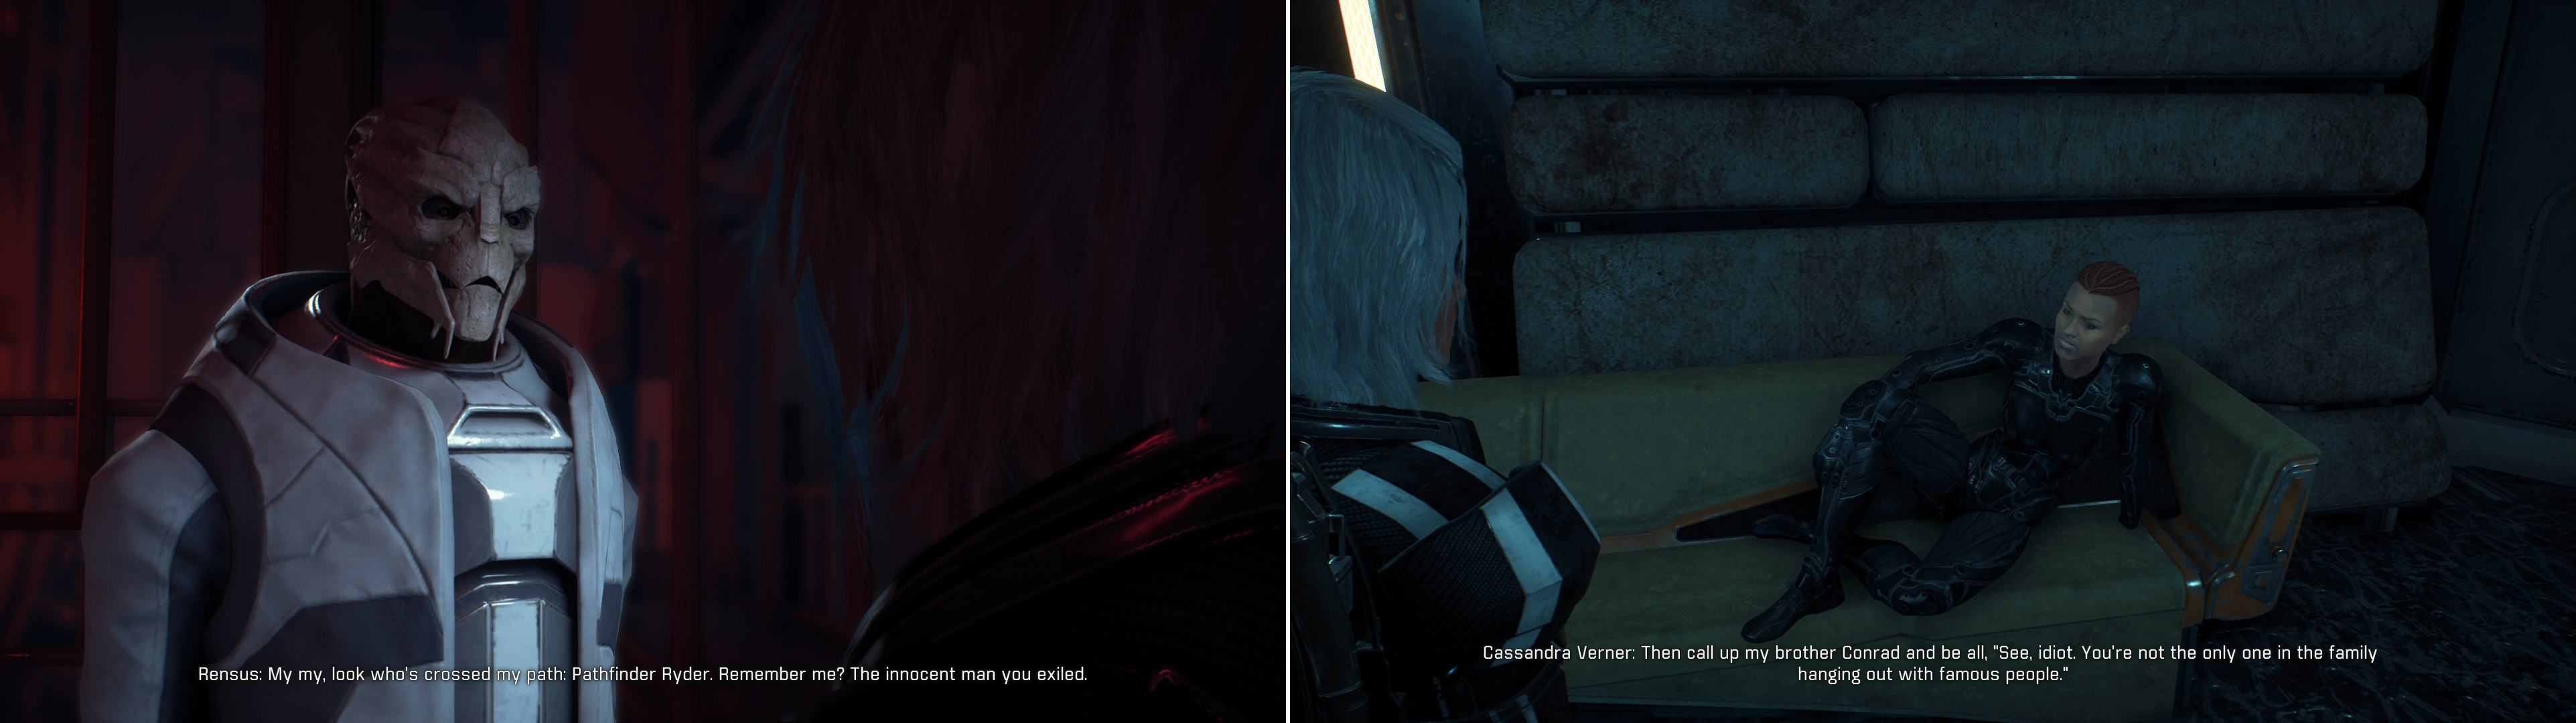 In Tartarus you might find famliar faces from you travels in Andromeda (left) or perhaps even references to previous adventures in the Milky Way (right).